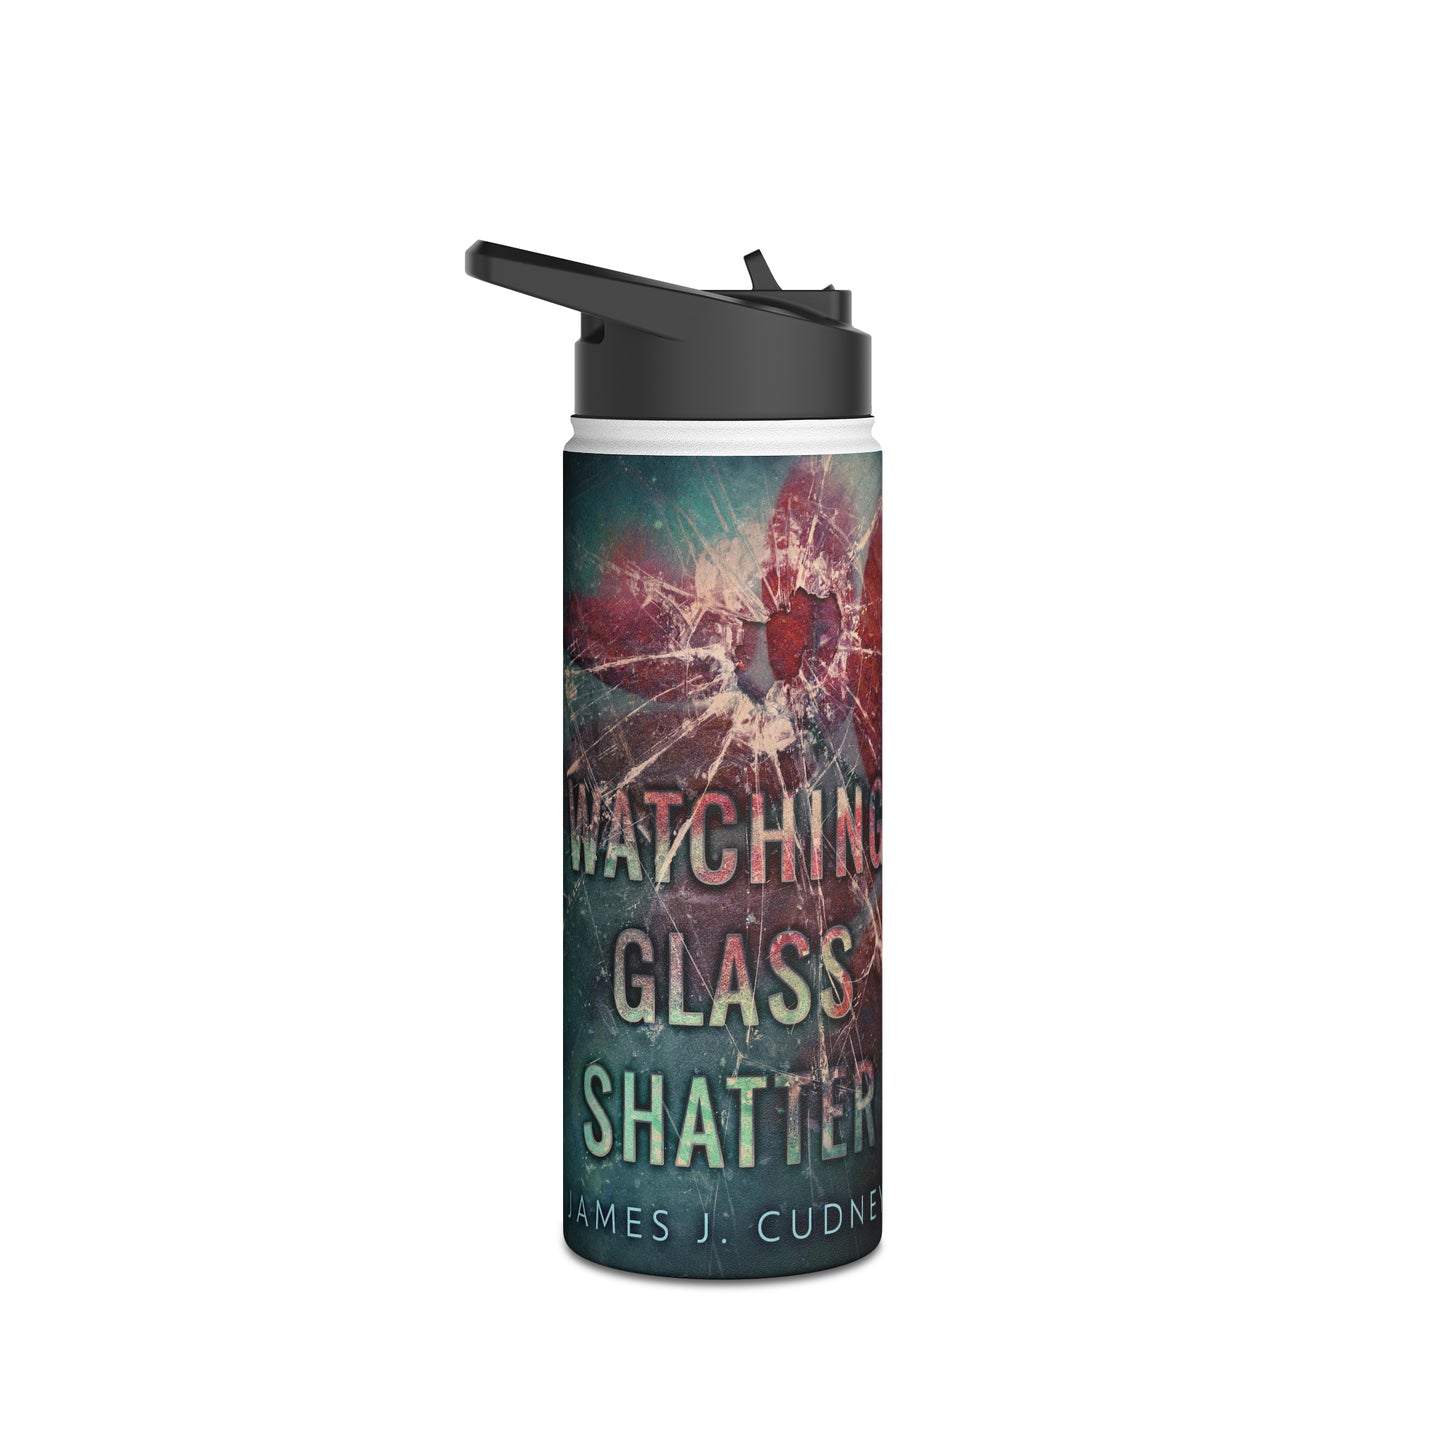 Watching Glass Shatter - Stainless Steel Water Bottle